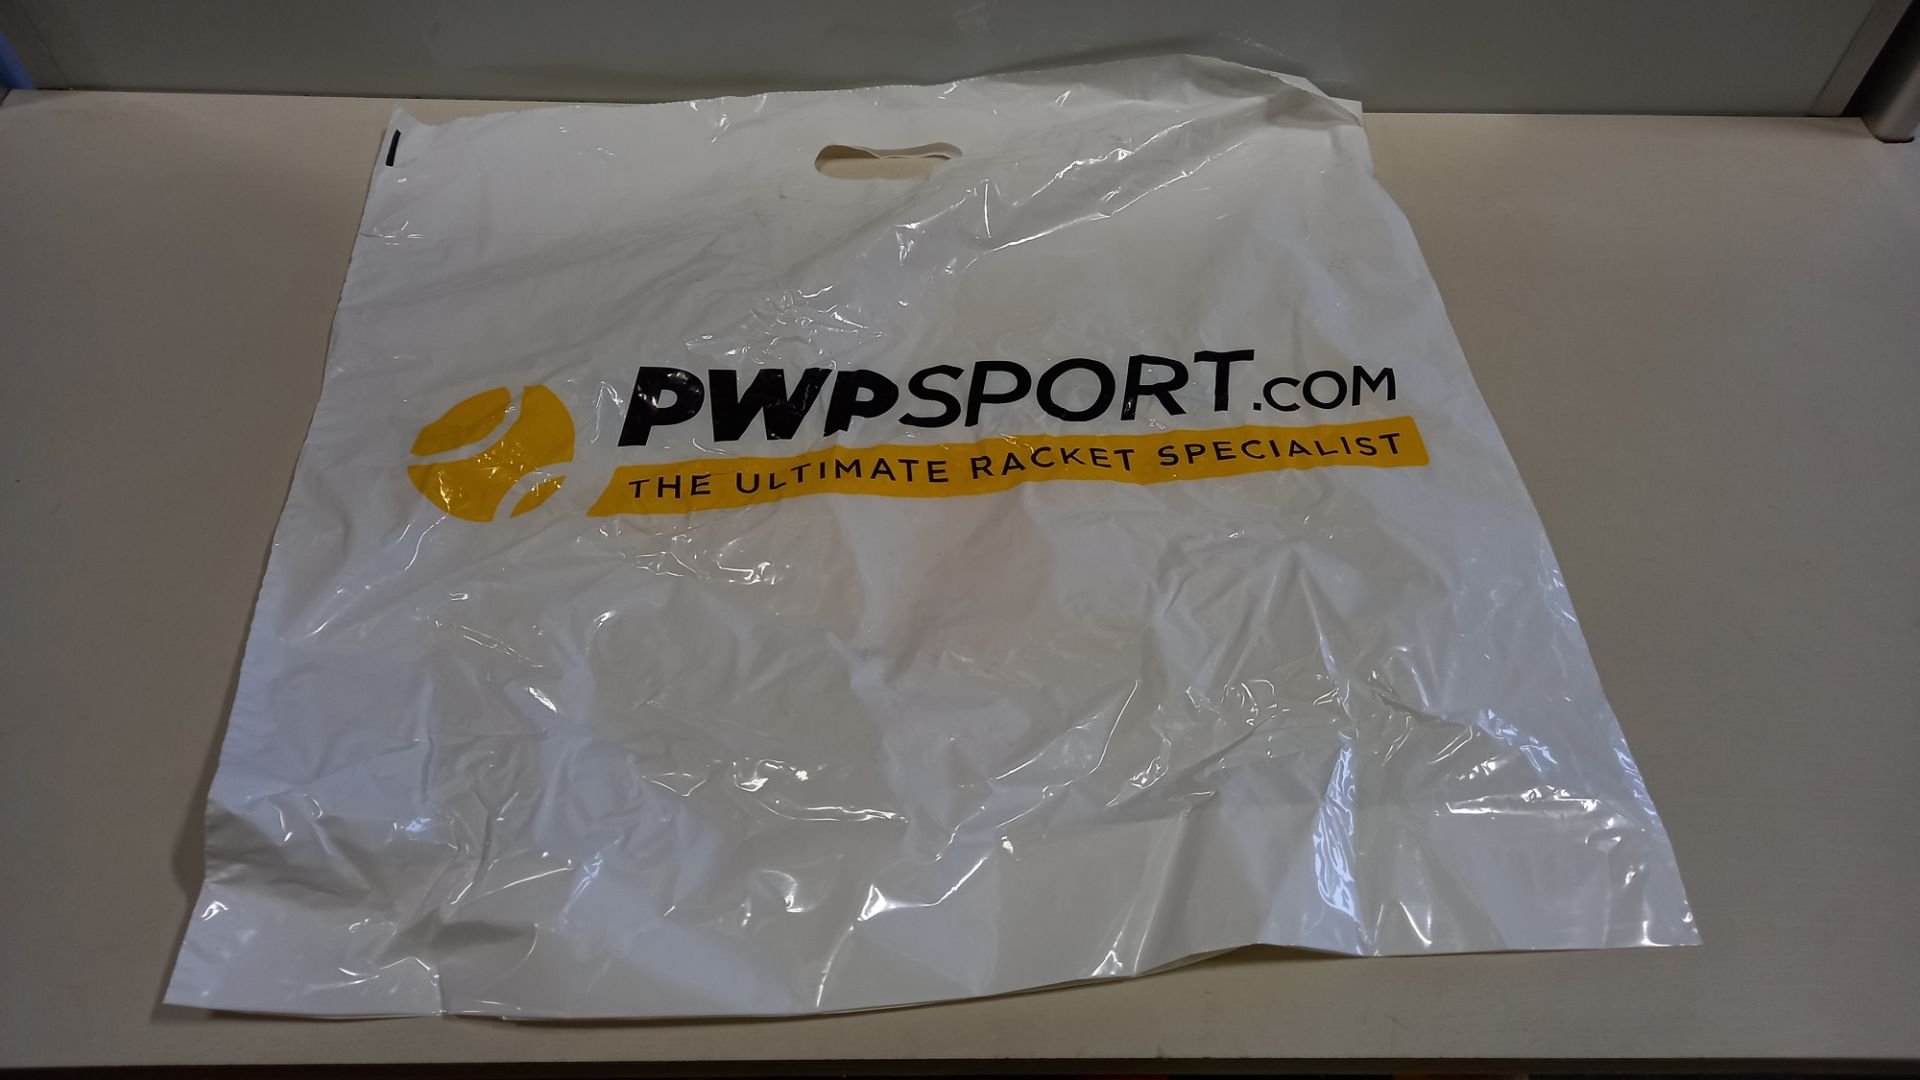 1000 X BRAND NEW PWPSPORTS.COM LARGE CARRIER BAGS IN 4 BOXES